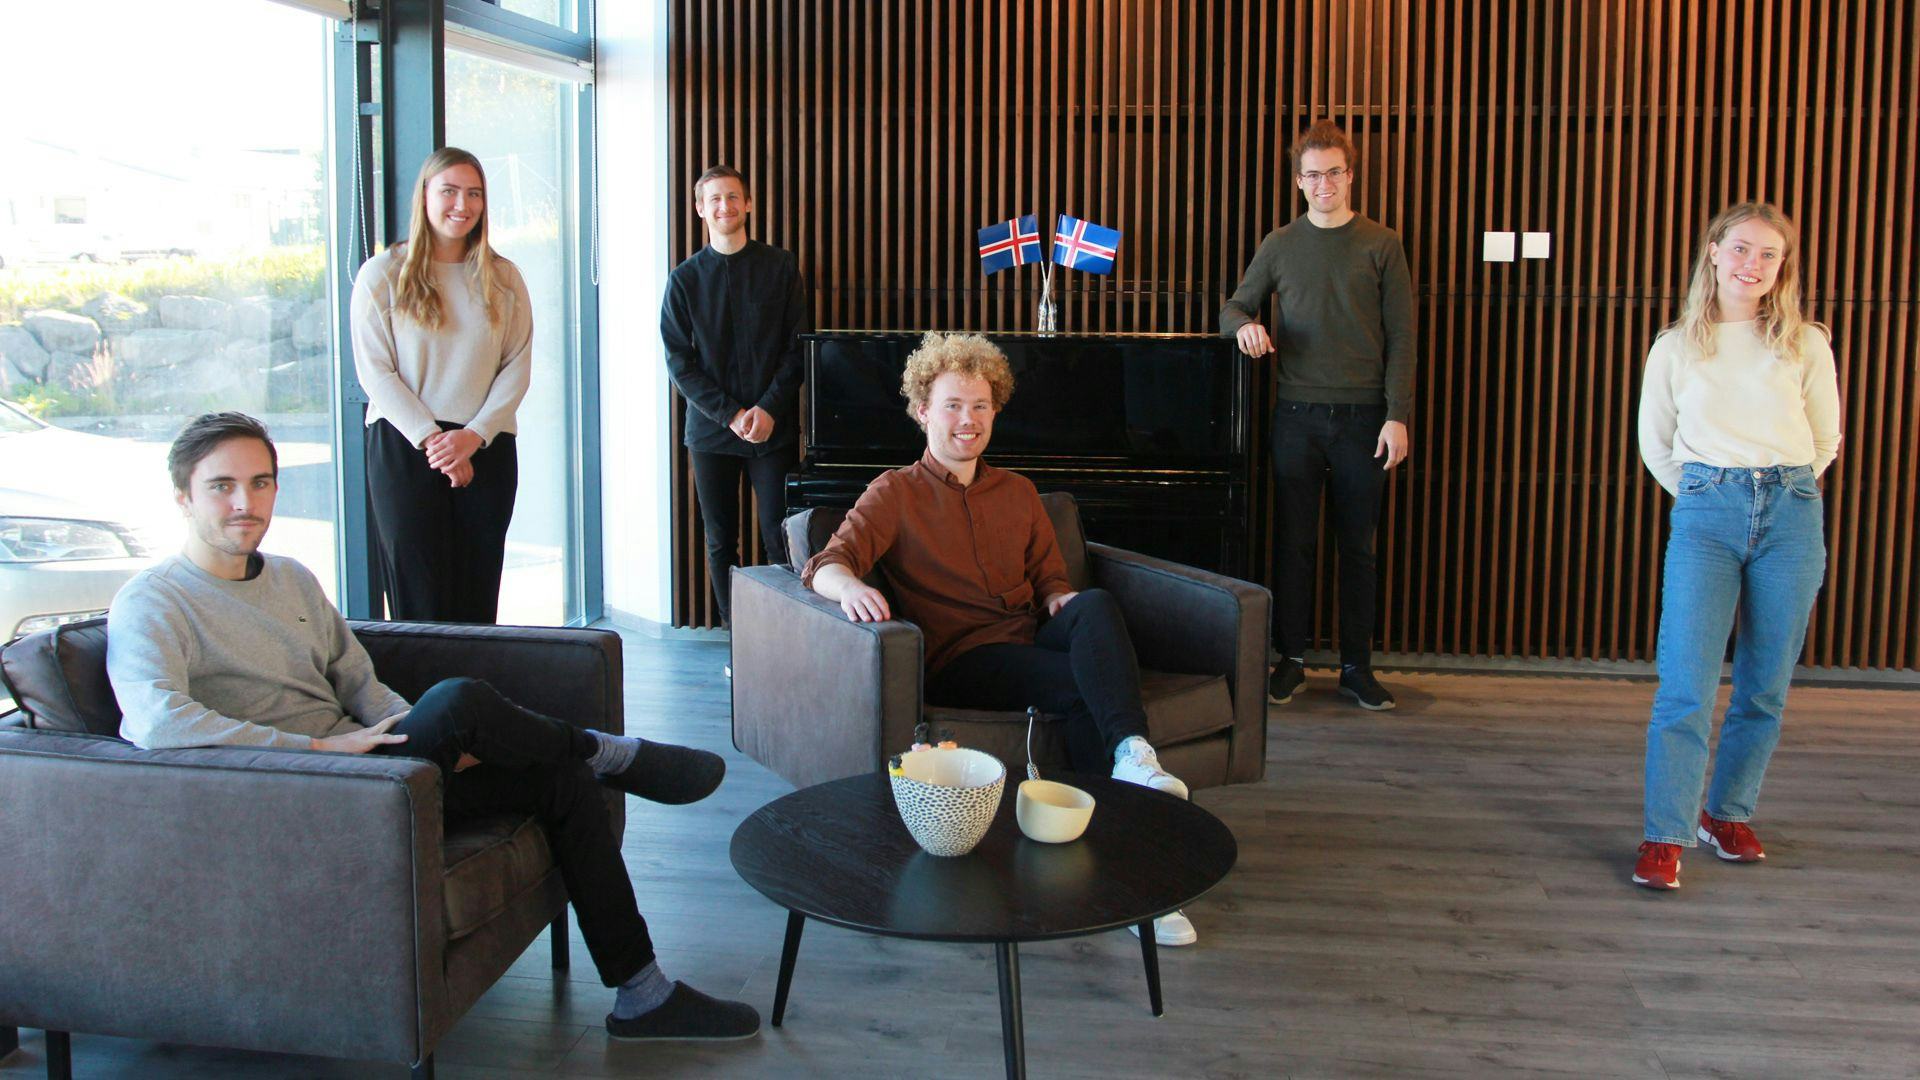 A group of young individuals posing in a modern interior space with a piano and Icelandic flags in the background